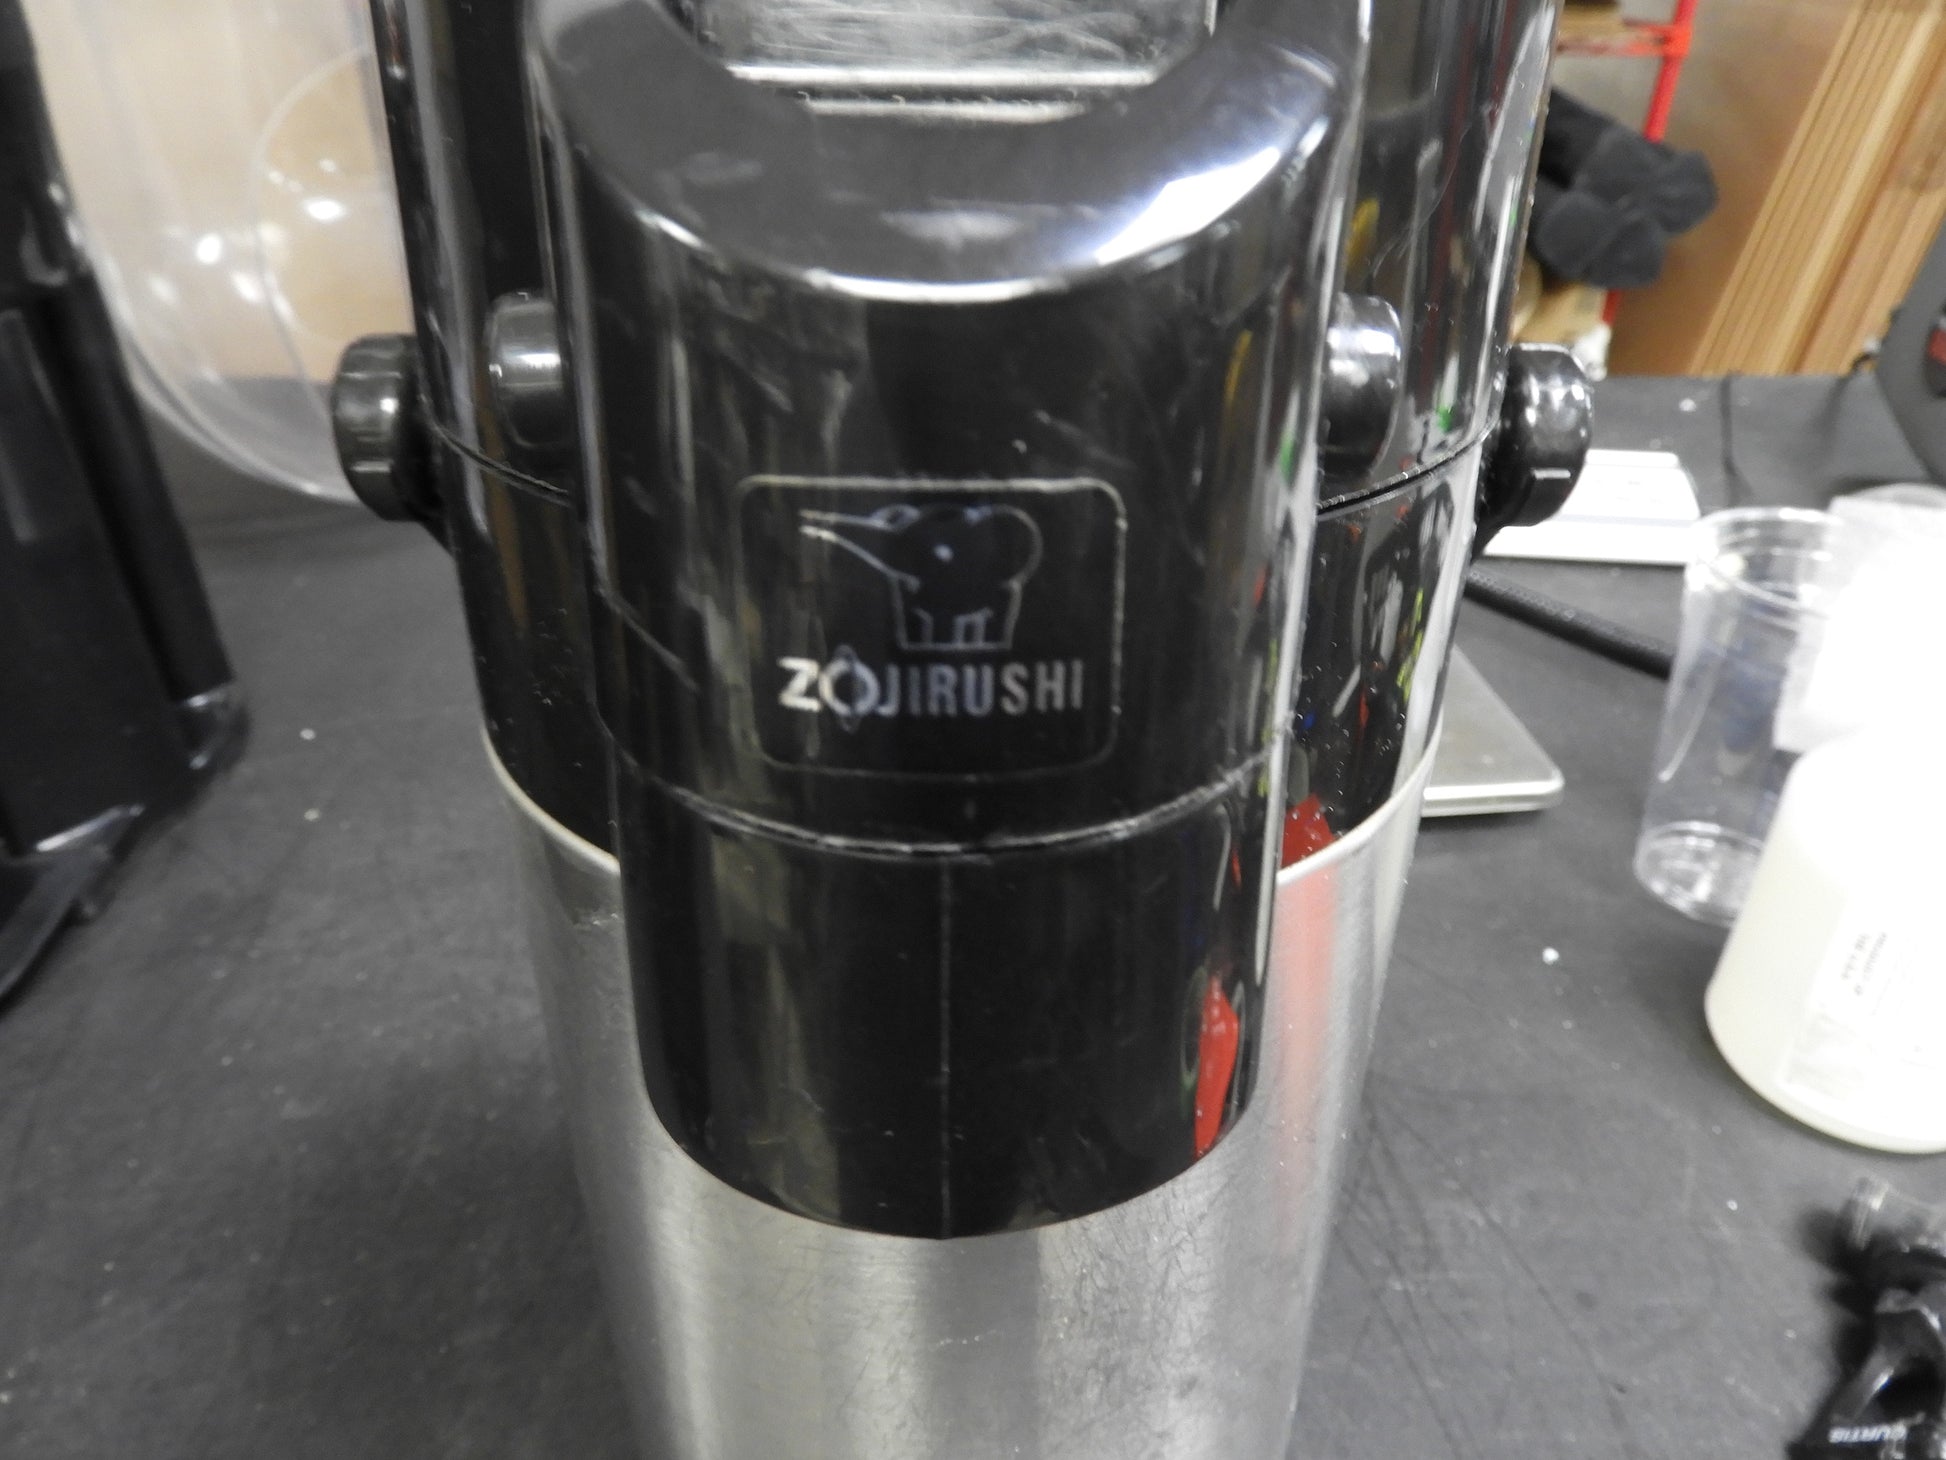 Zojirushi AAWE-30SB 3 Liter Glass-Lined Stainless Steel Air Pot